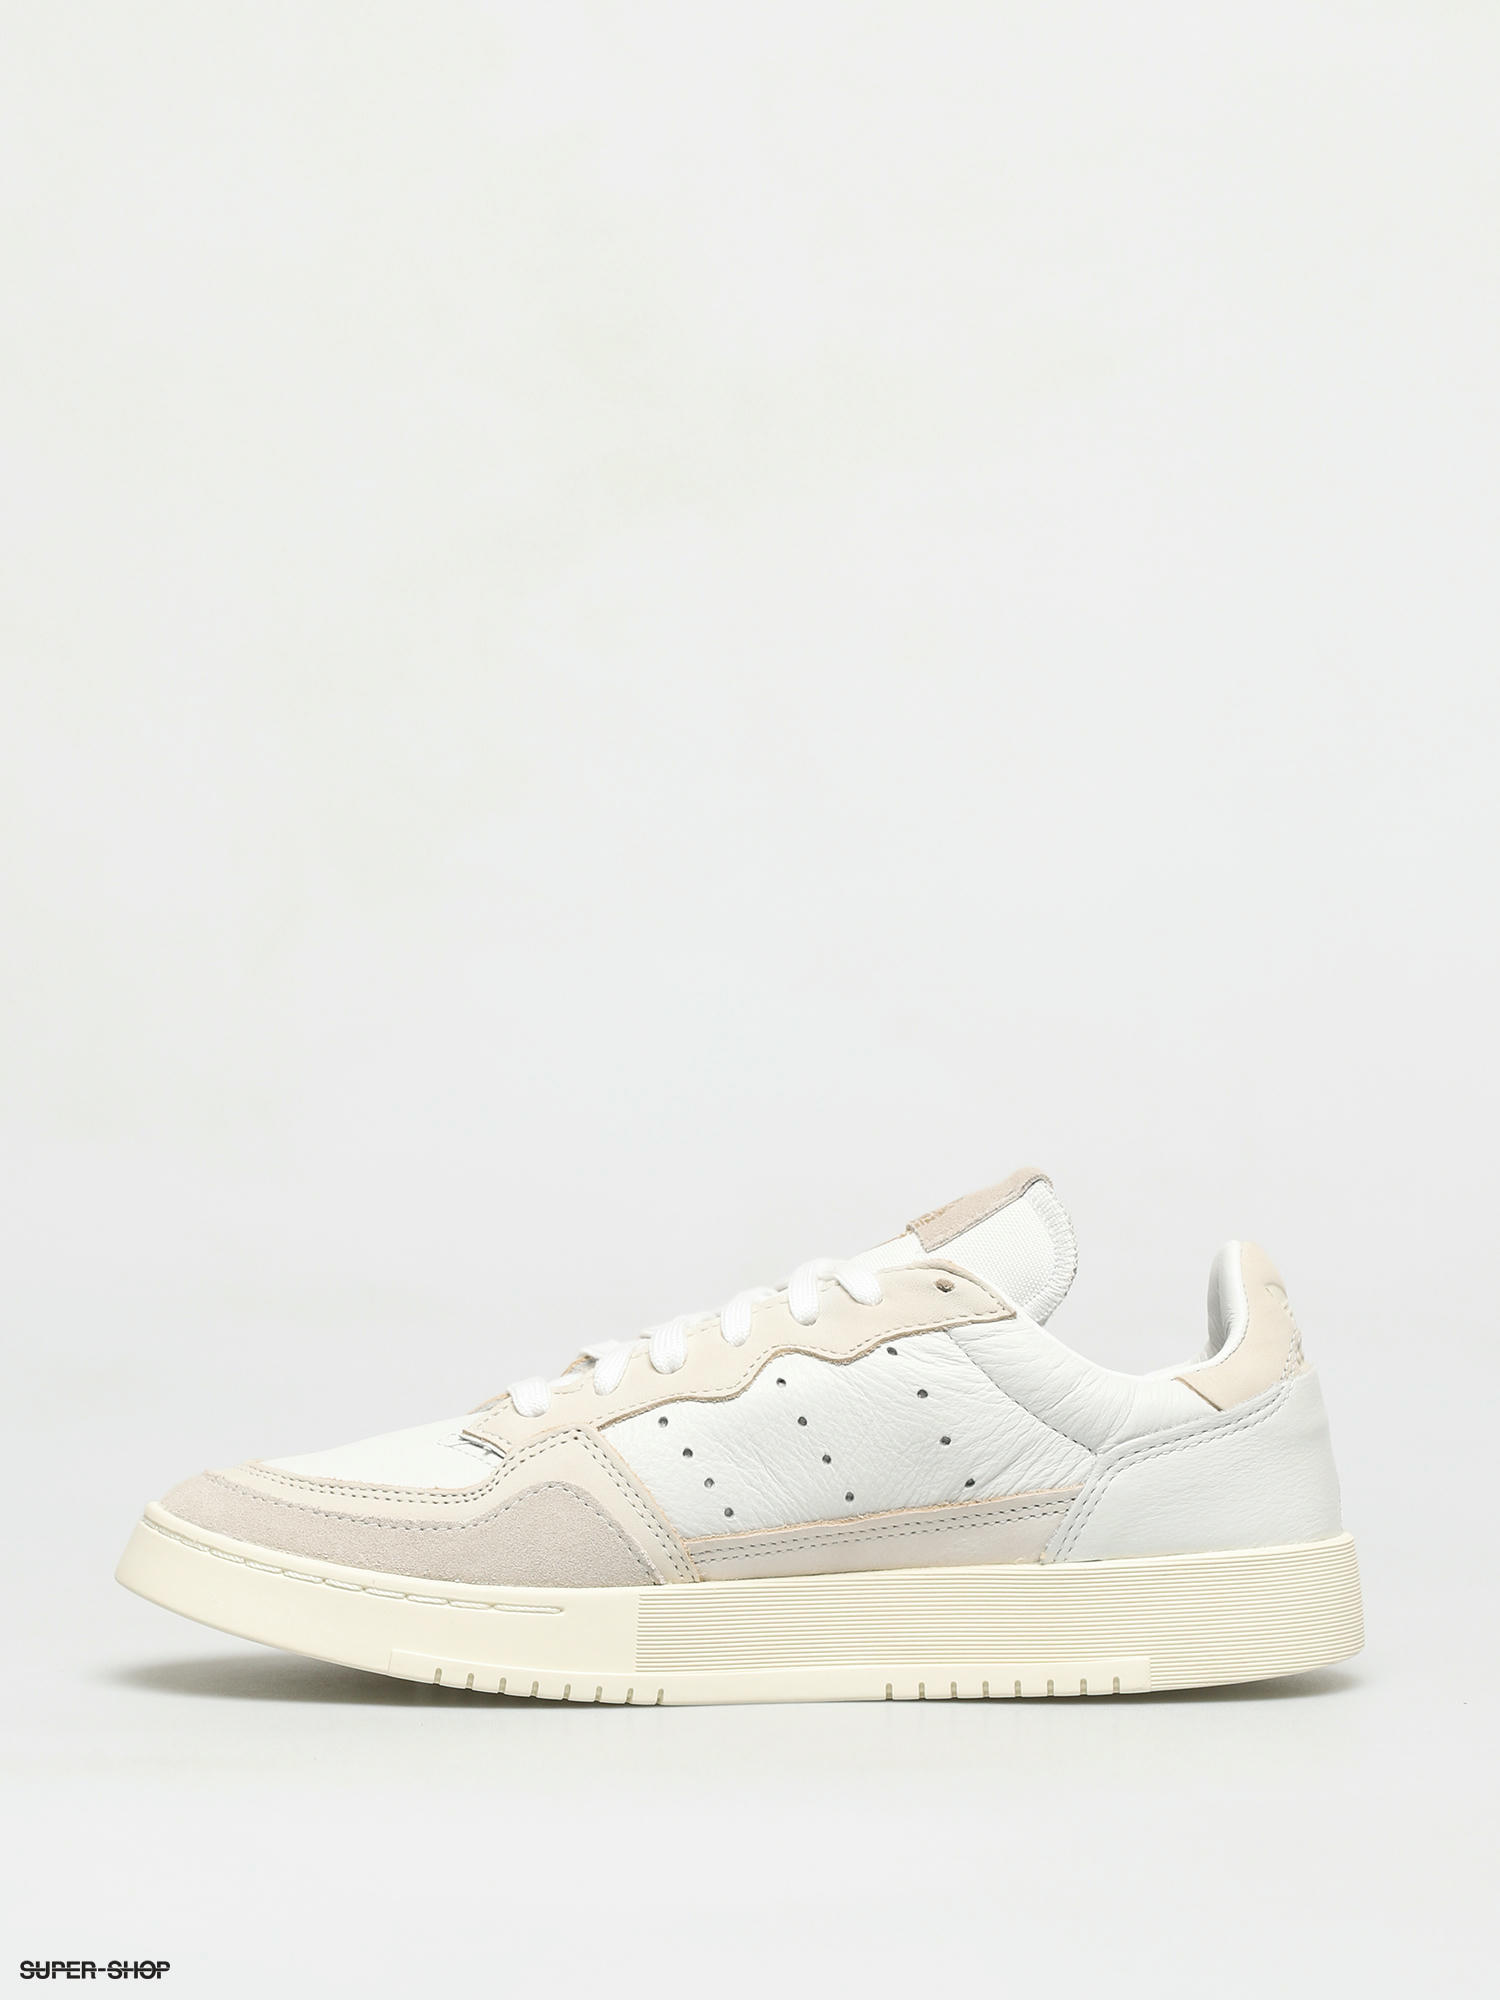 adidas Originals Shoes (crystal white/chalk white/off